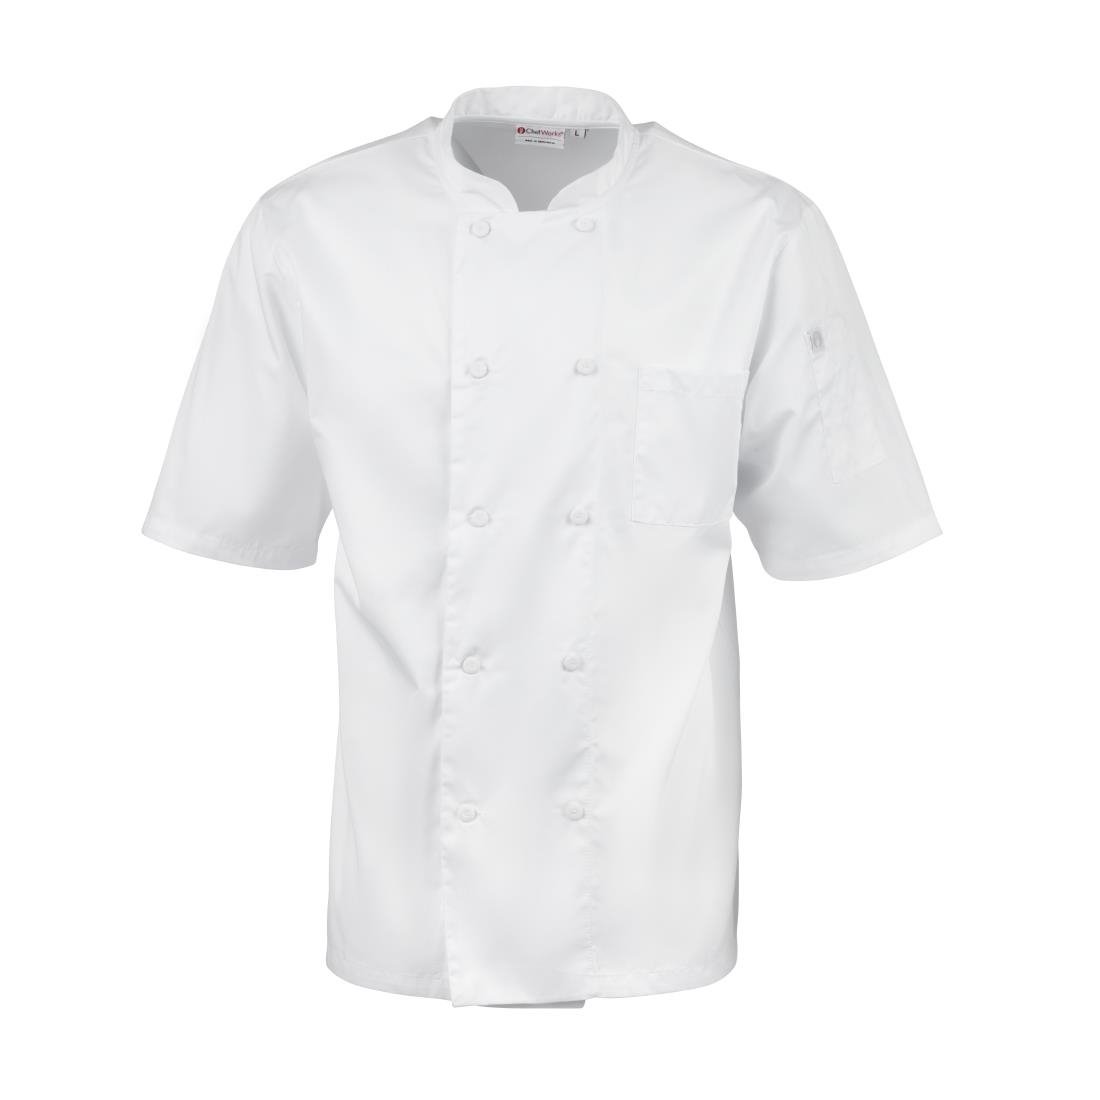 A914-M Chefs Works Montreal Cool Vent Unisex Short Sleeve Chefs Jacket White M